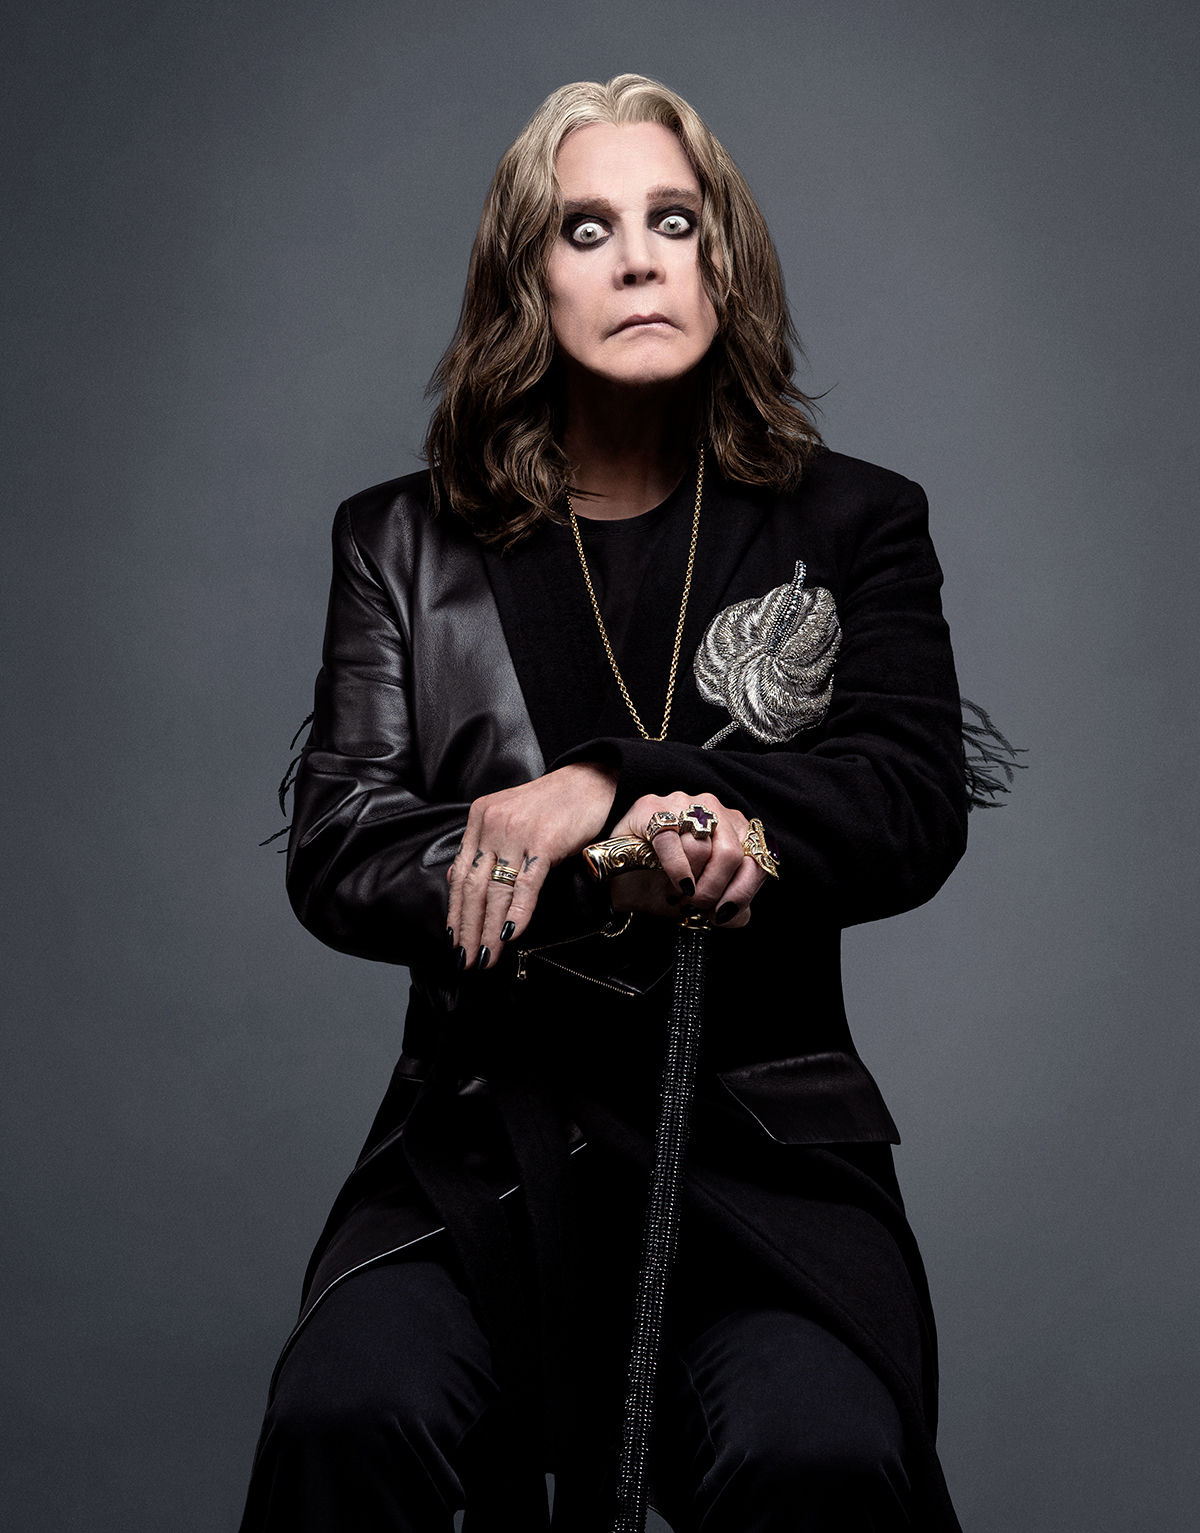 Ozzy Osbourne: “If I drop dead now, at least I can't say…